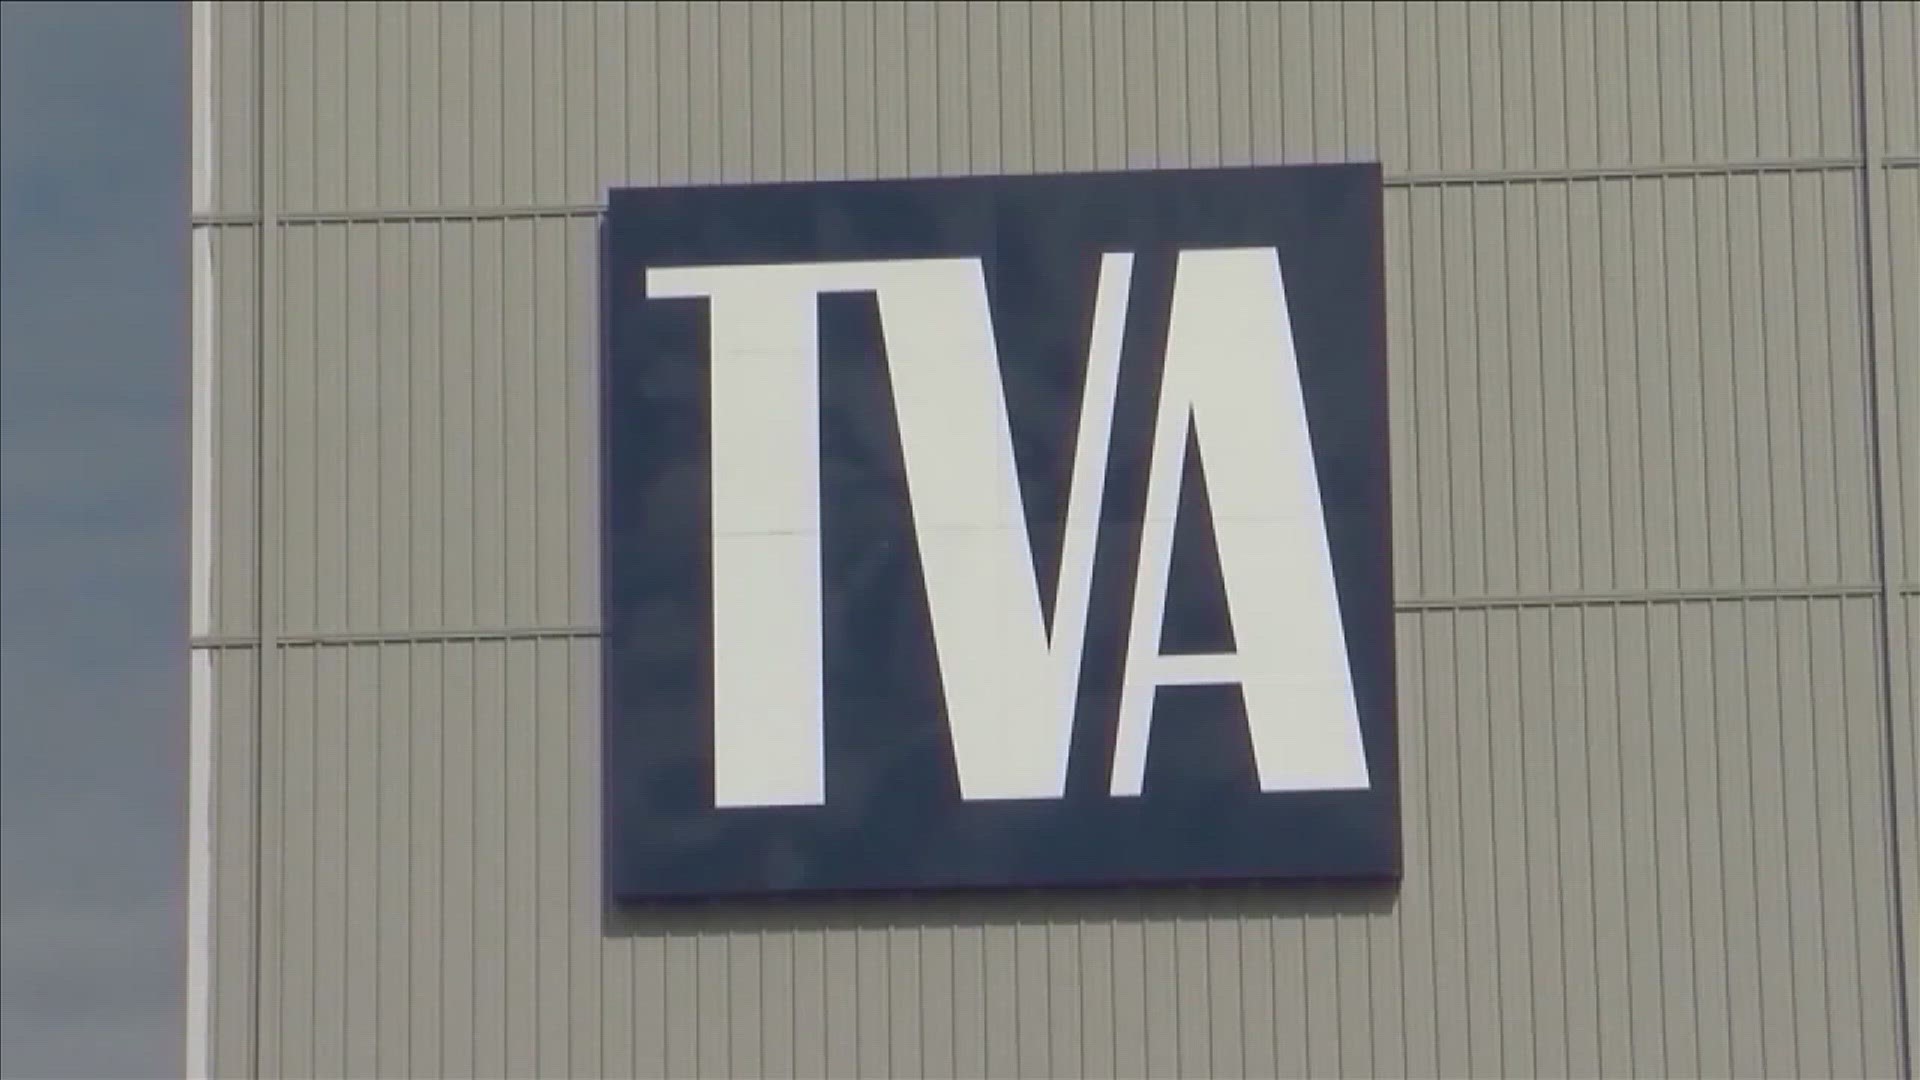 The TVA is providing a $245,000 grant through its Community Care Fund to assist Memphis Light, Gas and Water Division customers who have delayed bills.